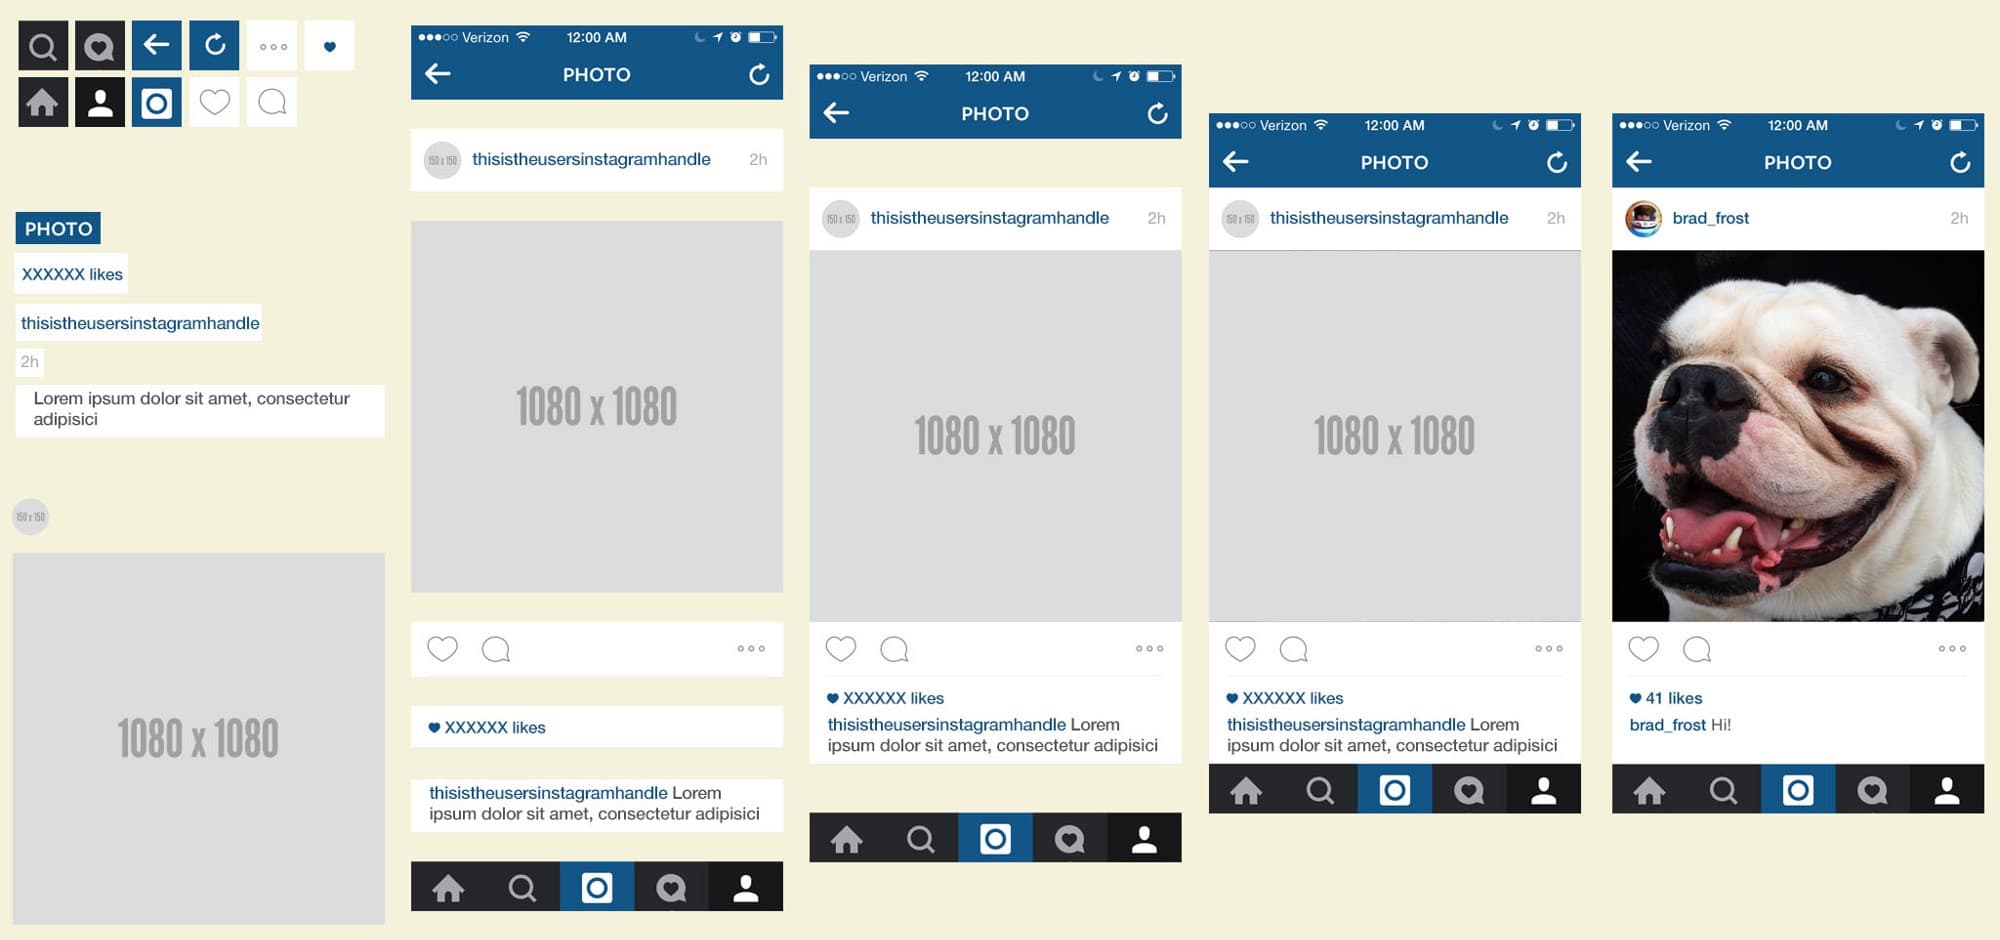 Atomic design applied to the native mobile app Instagram — Brad Frost